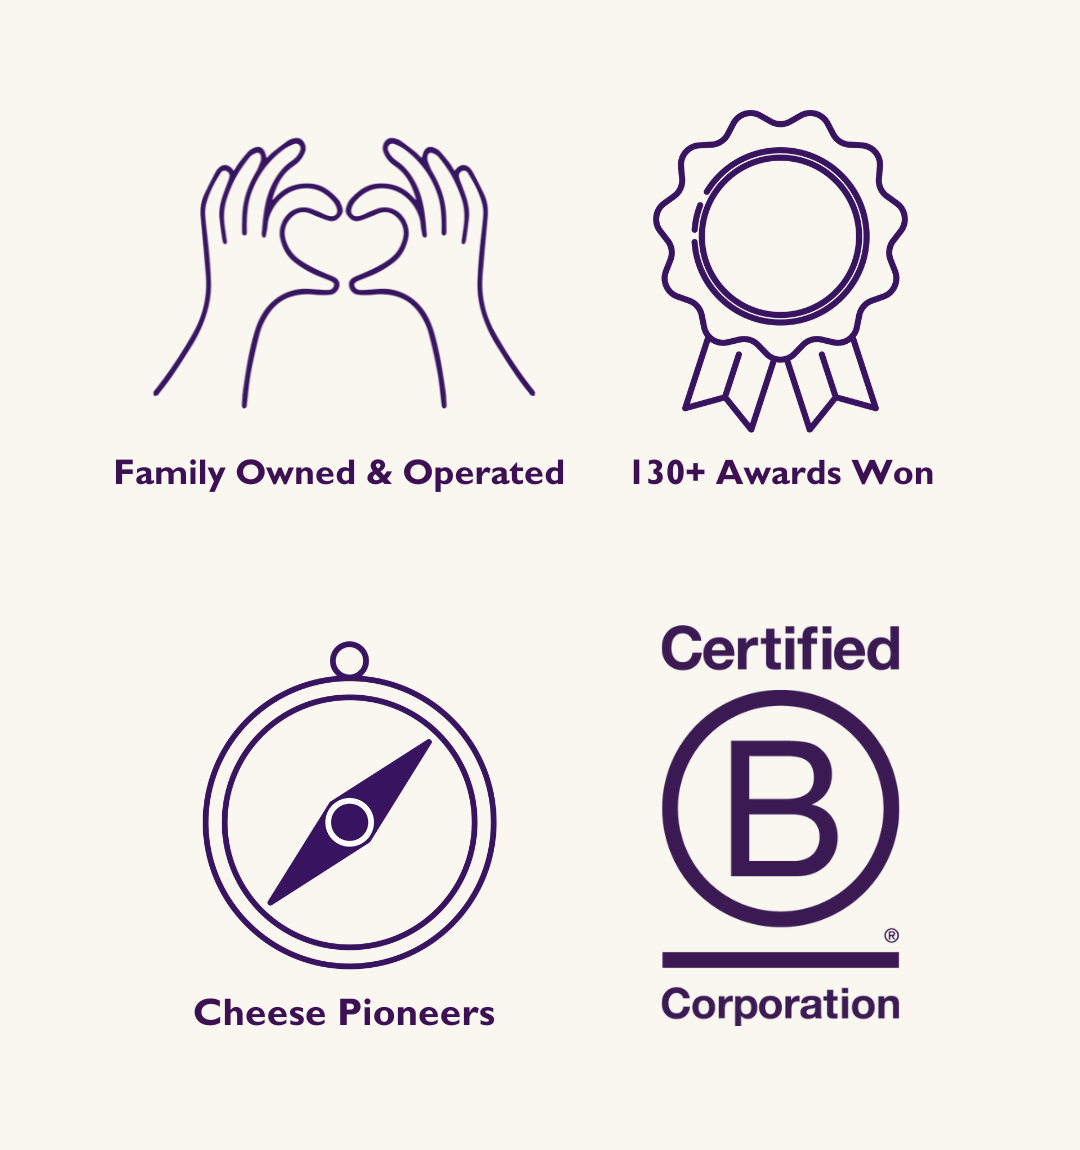 This image has 5 icons with text underneath the icons. From left to right: Certified B Corporation logo, hands making a heart with text reading “Family Owned and Operated, an award icon with text that reads “130+ awards won”, a compass icon that reads “Cheese Pioneers”.